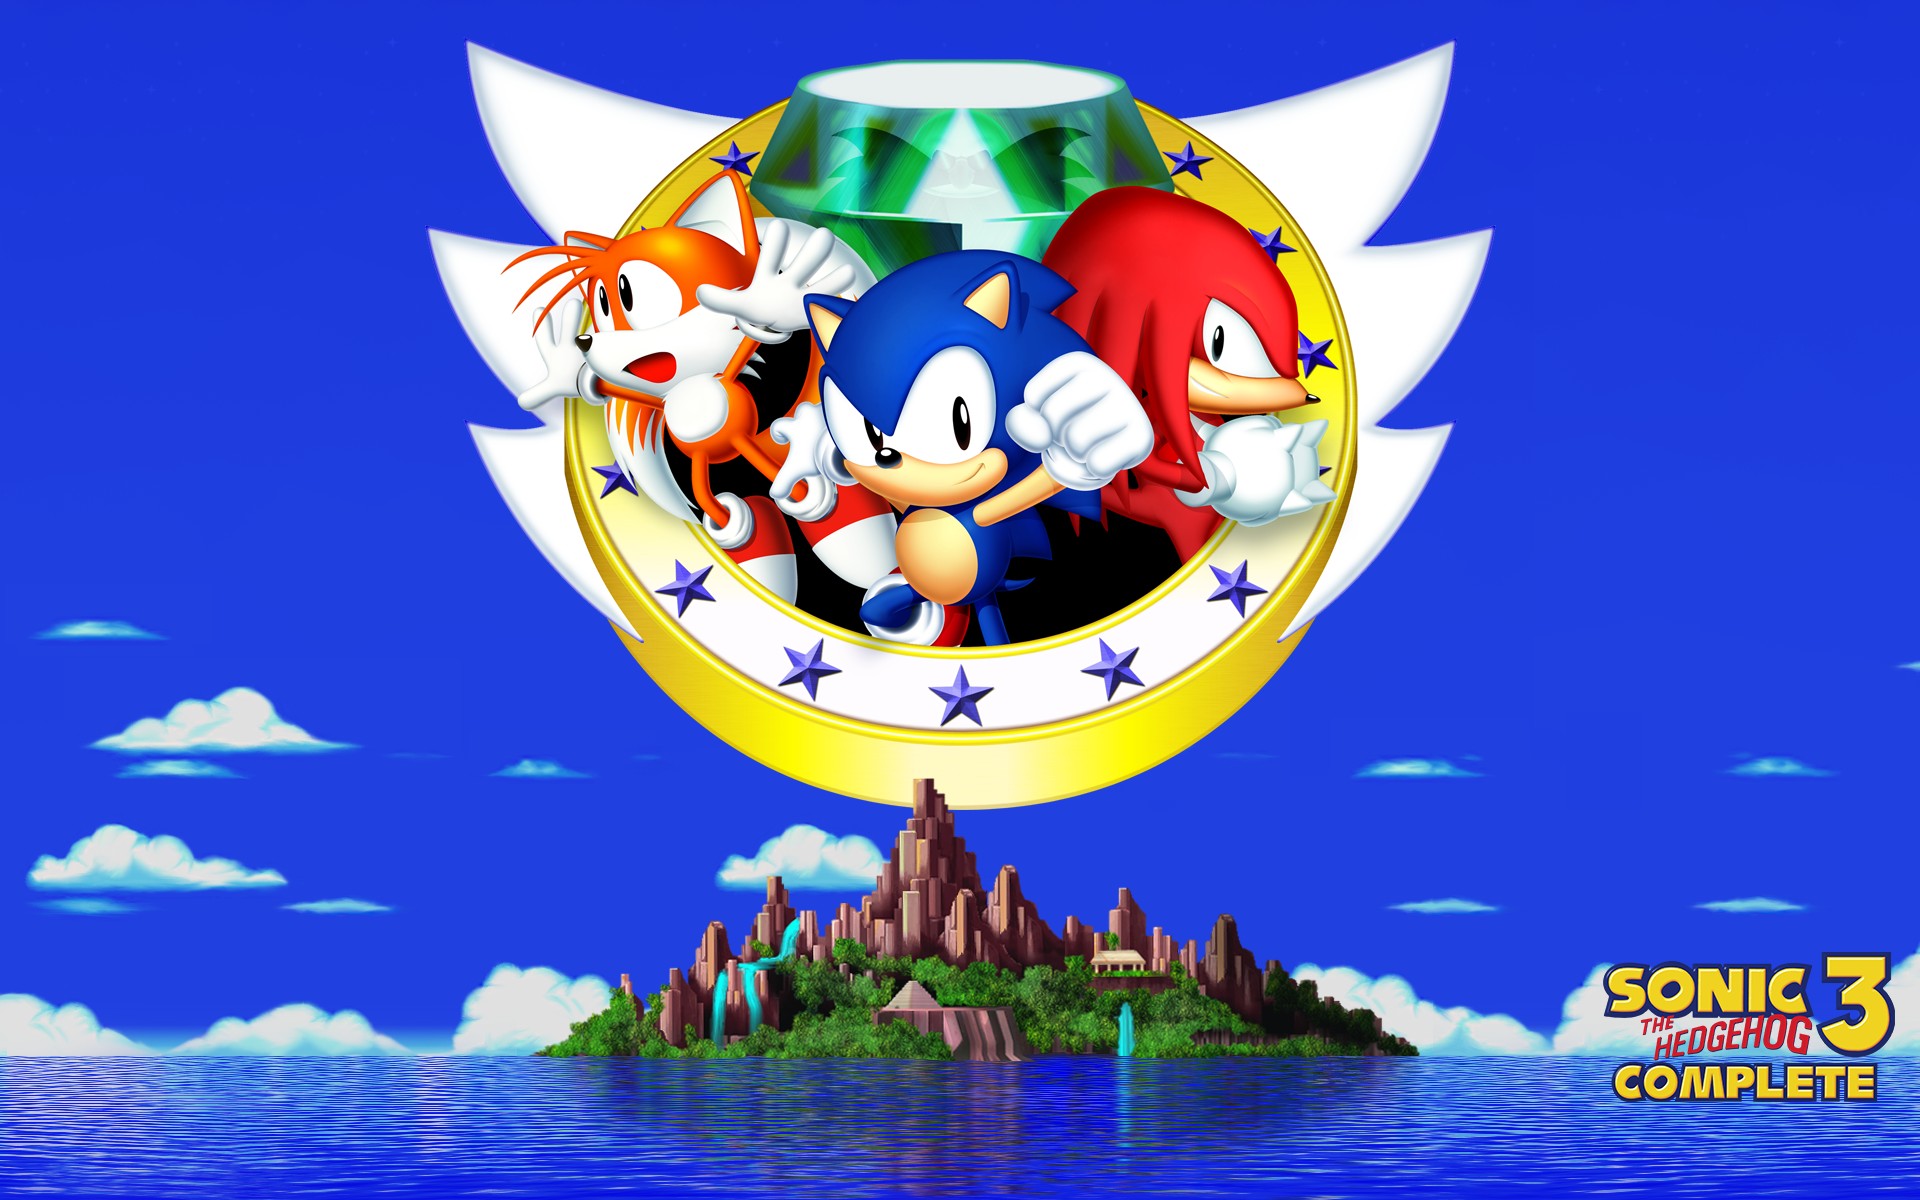 Tails (character), Sonic, Knuckles Wallpaper